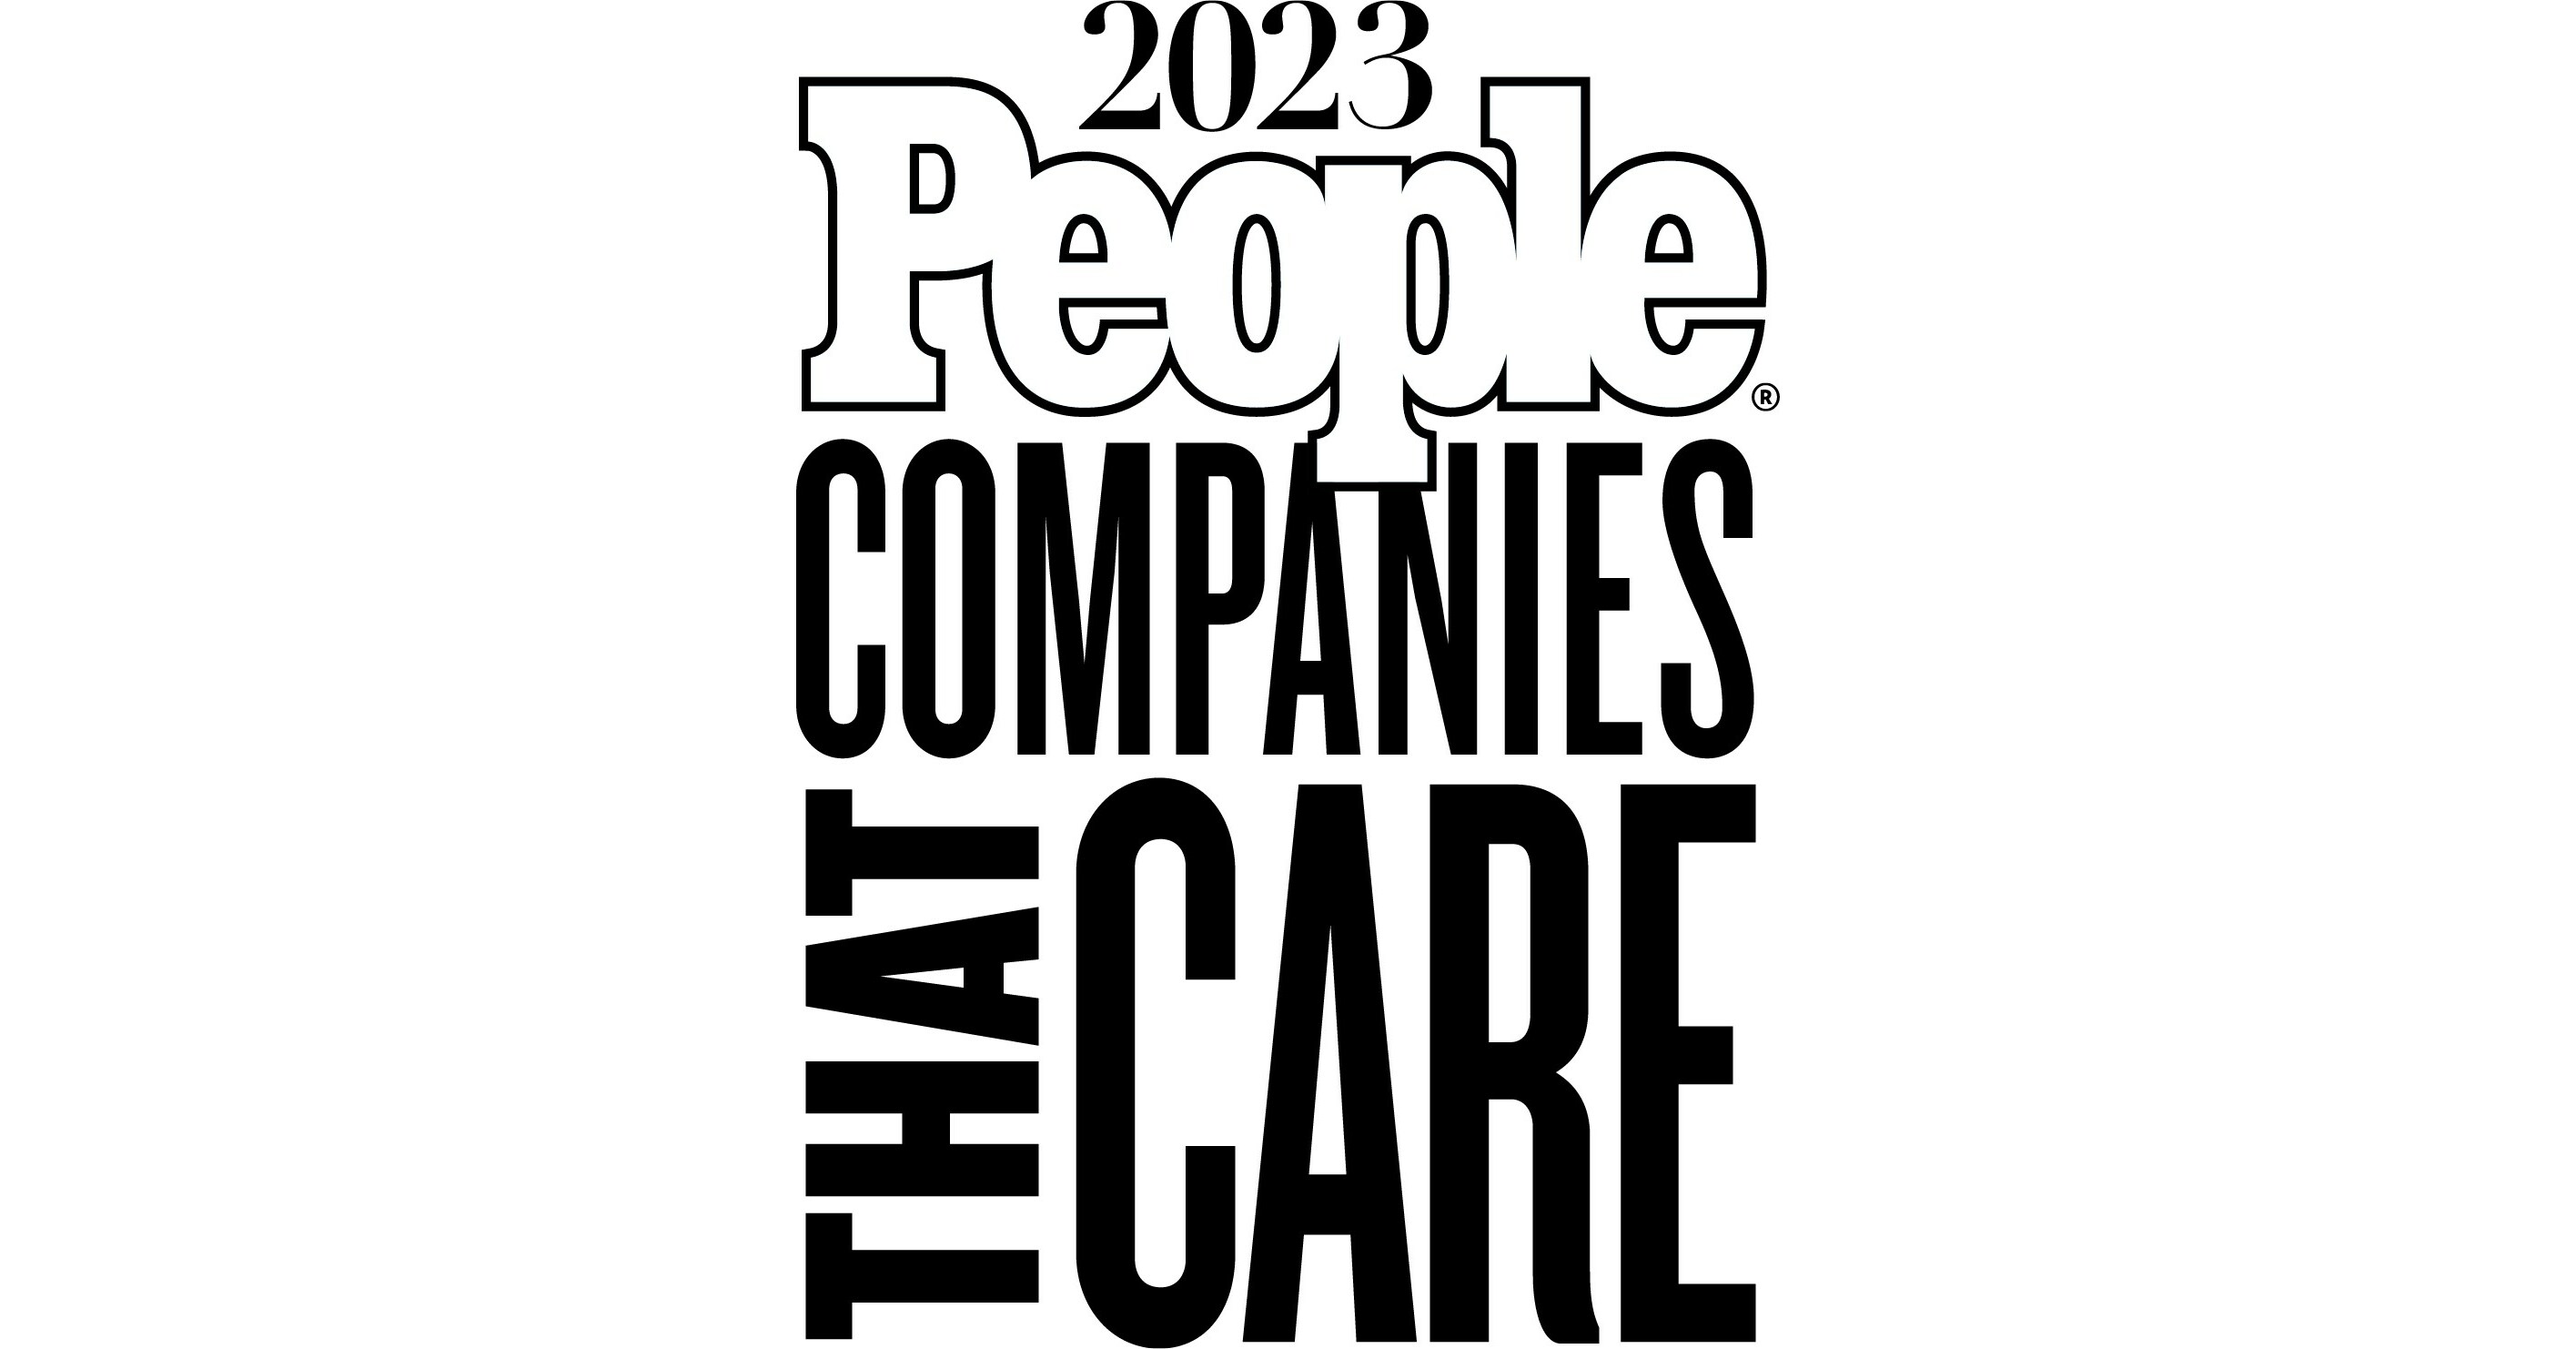 Venterra Realty Named on the 2023 PEOPLE Companies That Care List